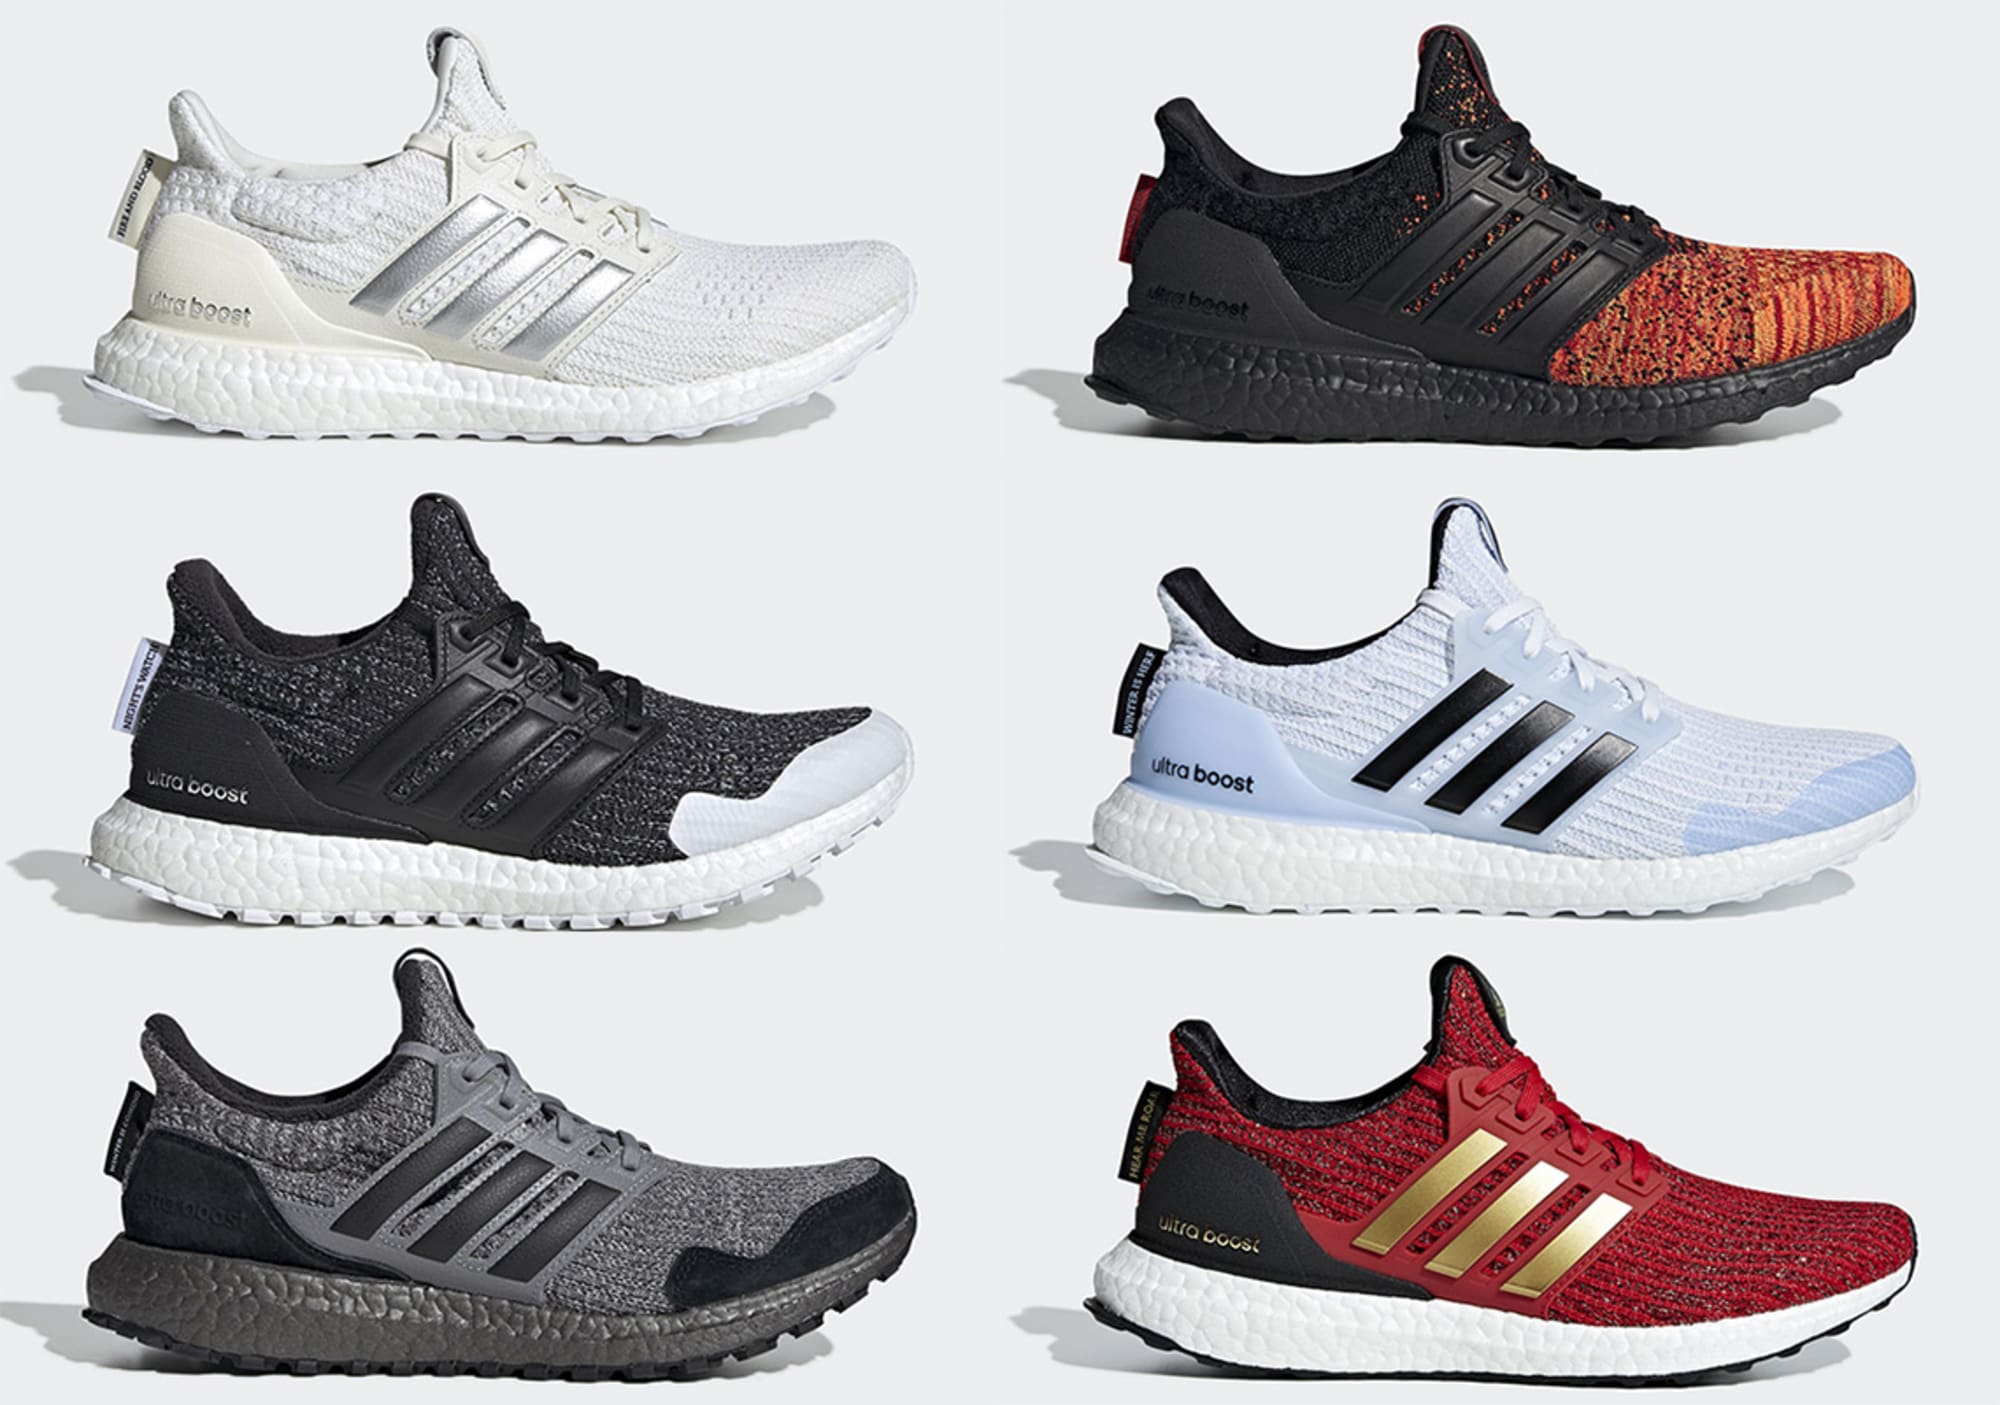 adidas giving away free shoes 2019